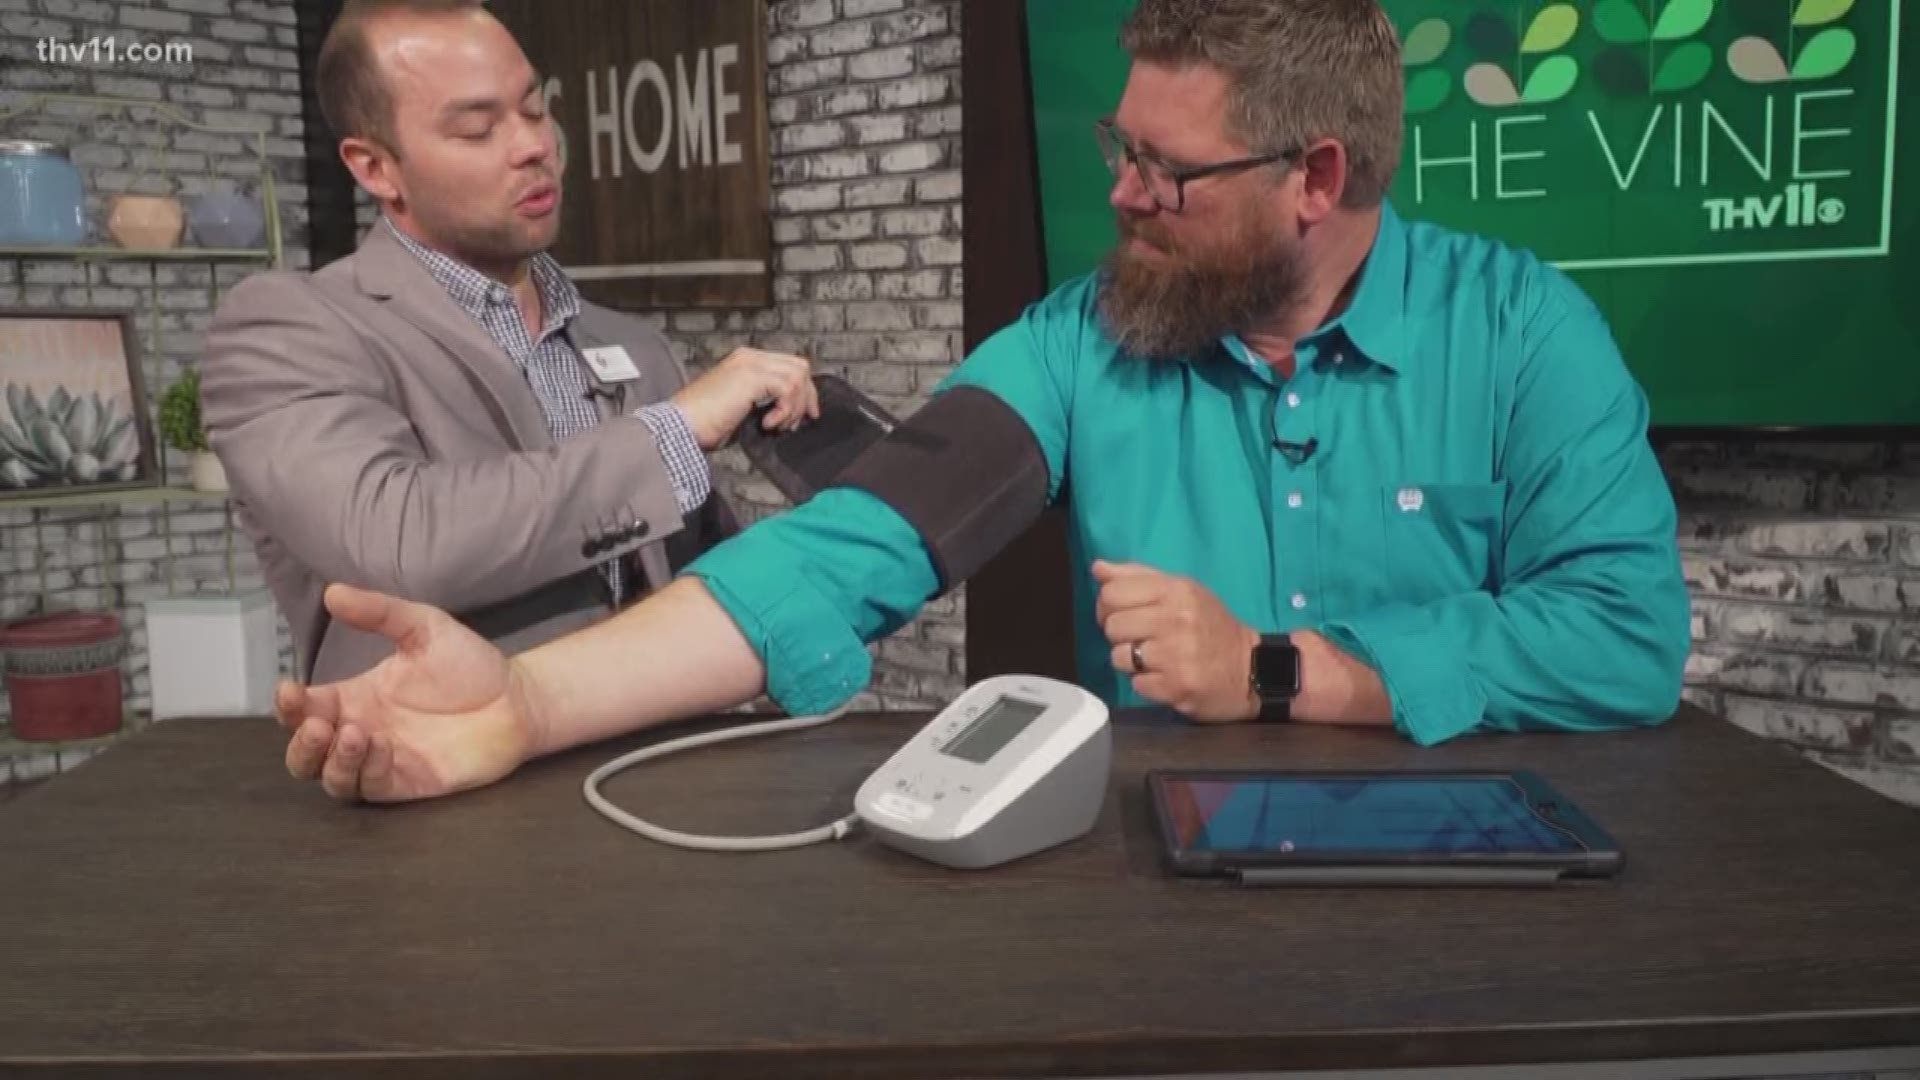 The Vine's Adam Bledsoe checked his blood pressure with the American Heart Association.